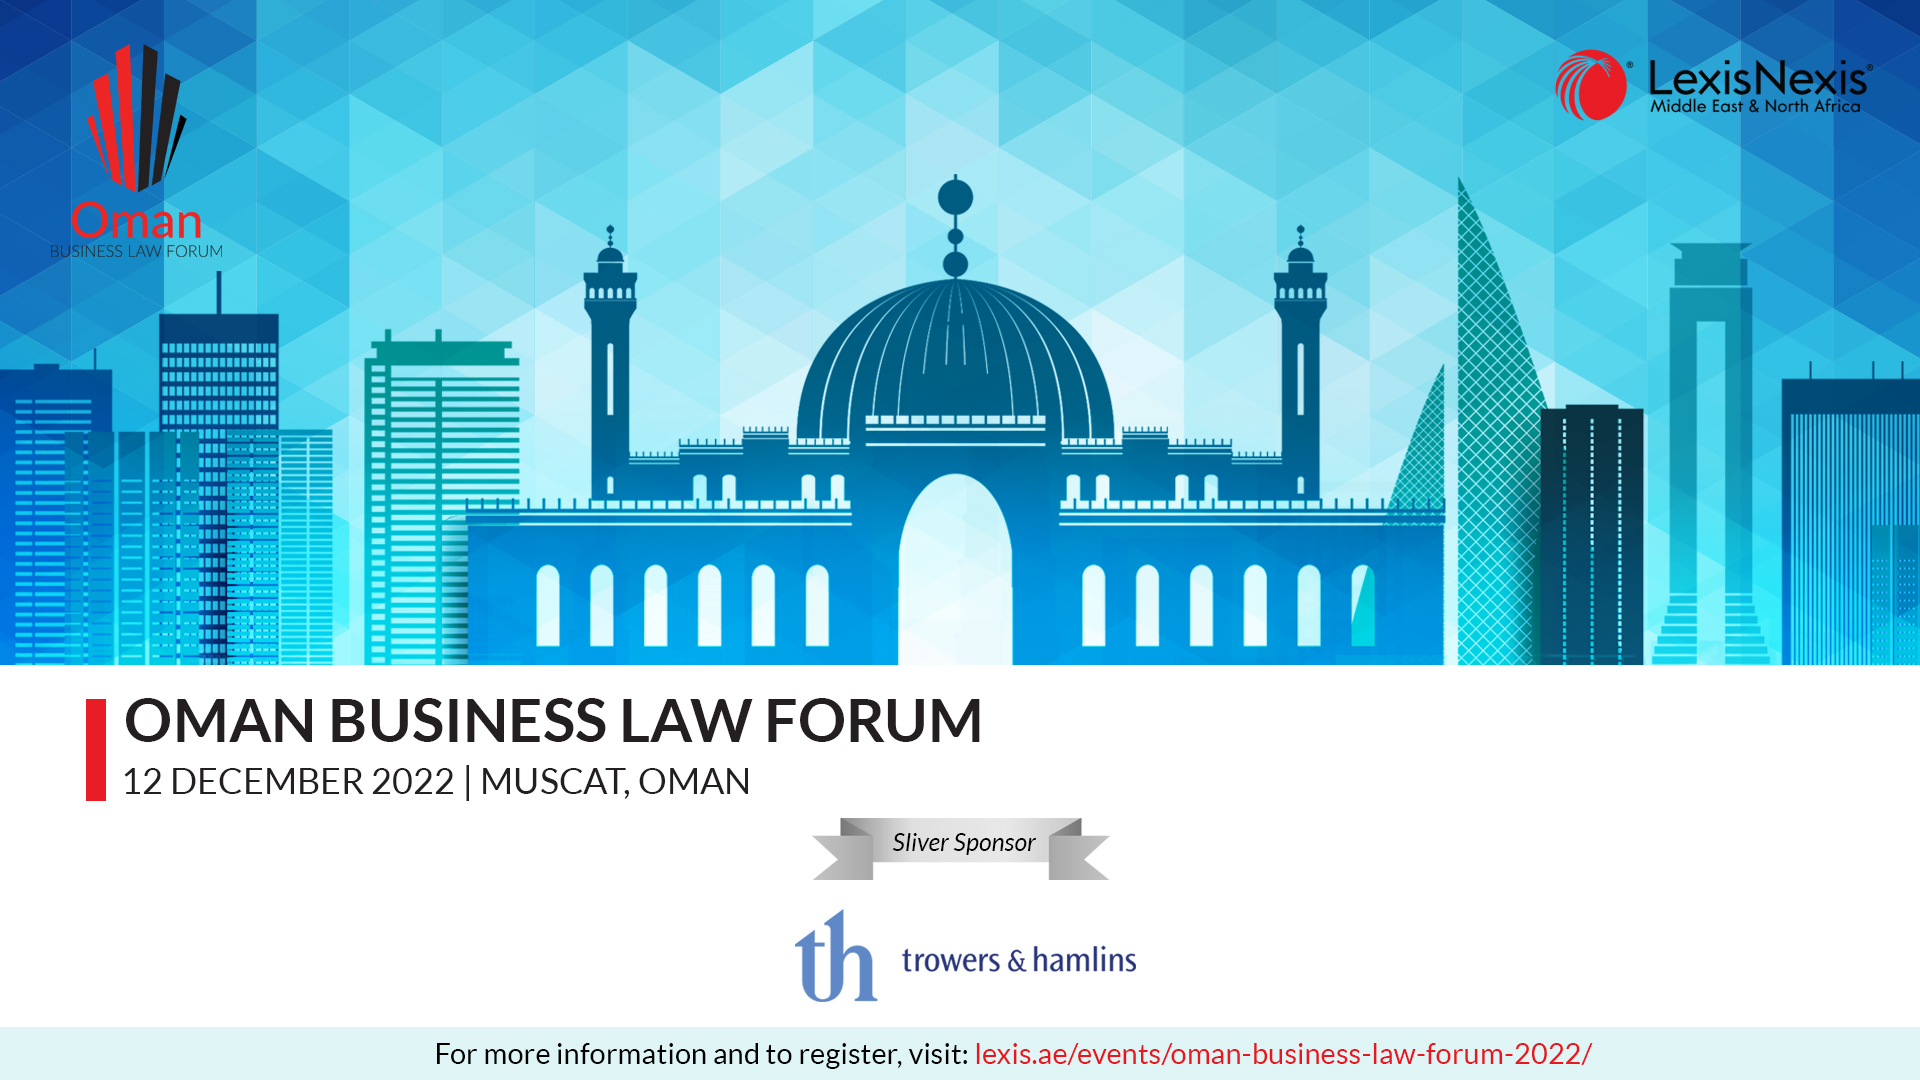 Trowers & Hamlins participates as a Silver Sponsor of the Oman Business Law Forum Conference 2022 – 5th Edition!